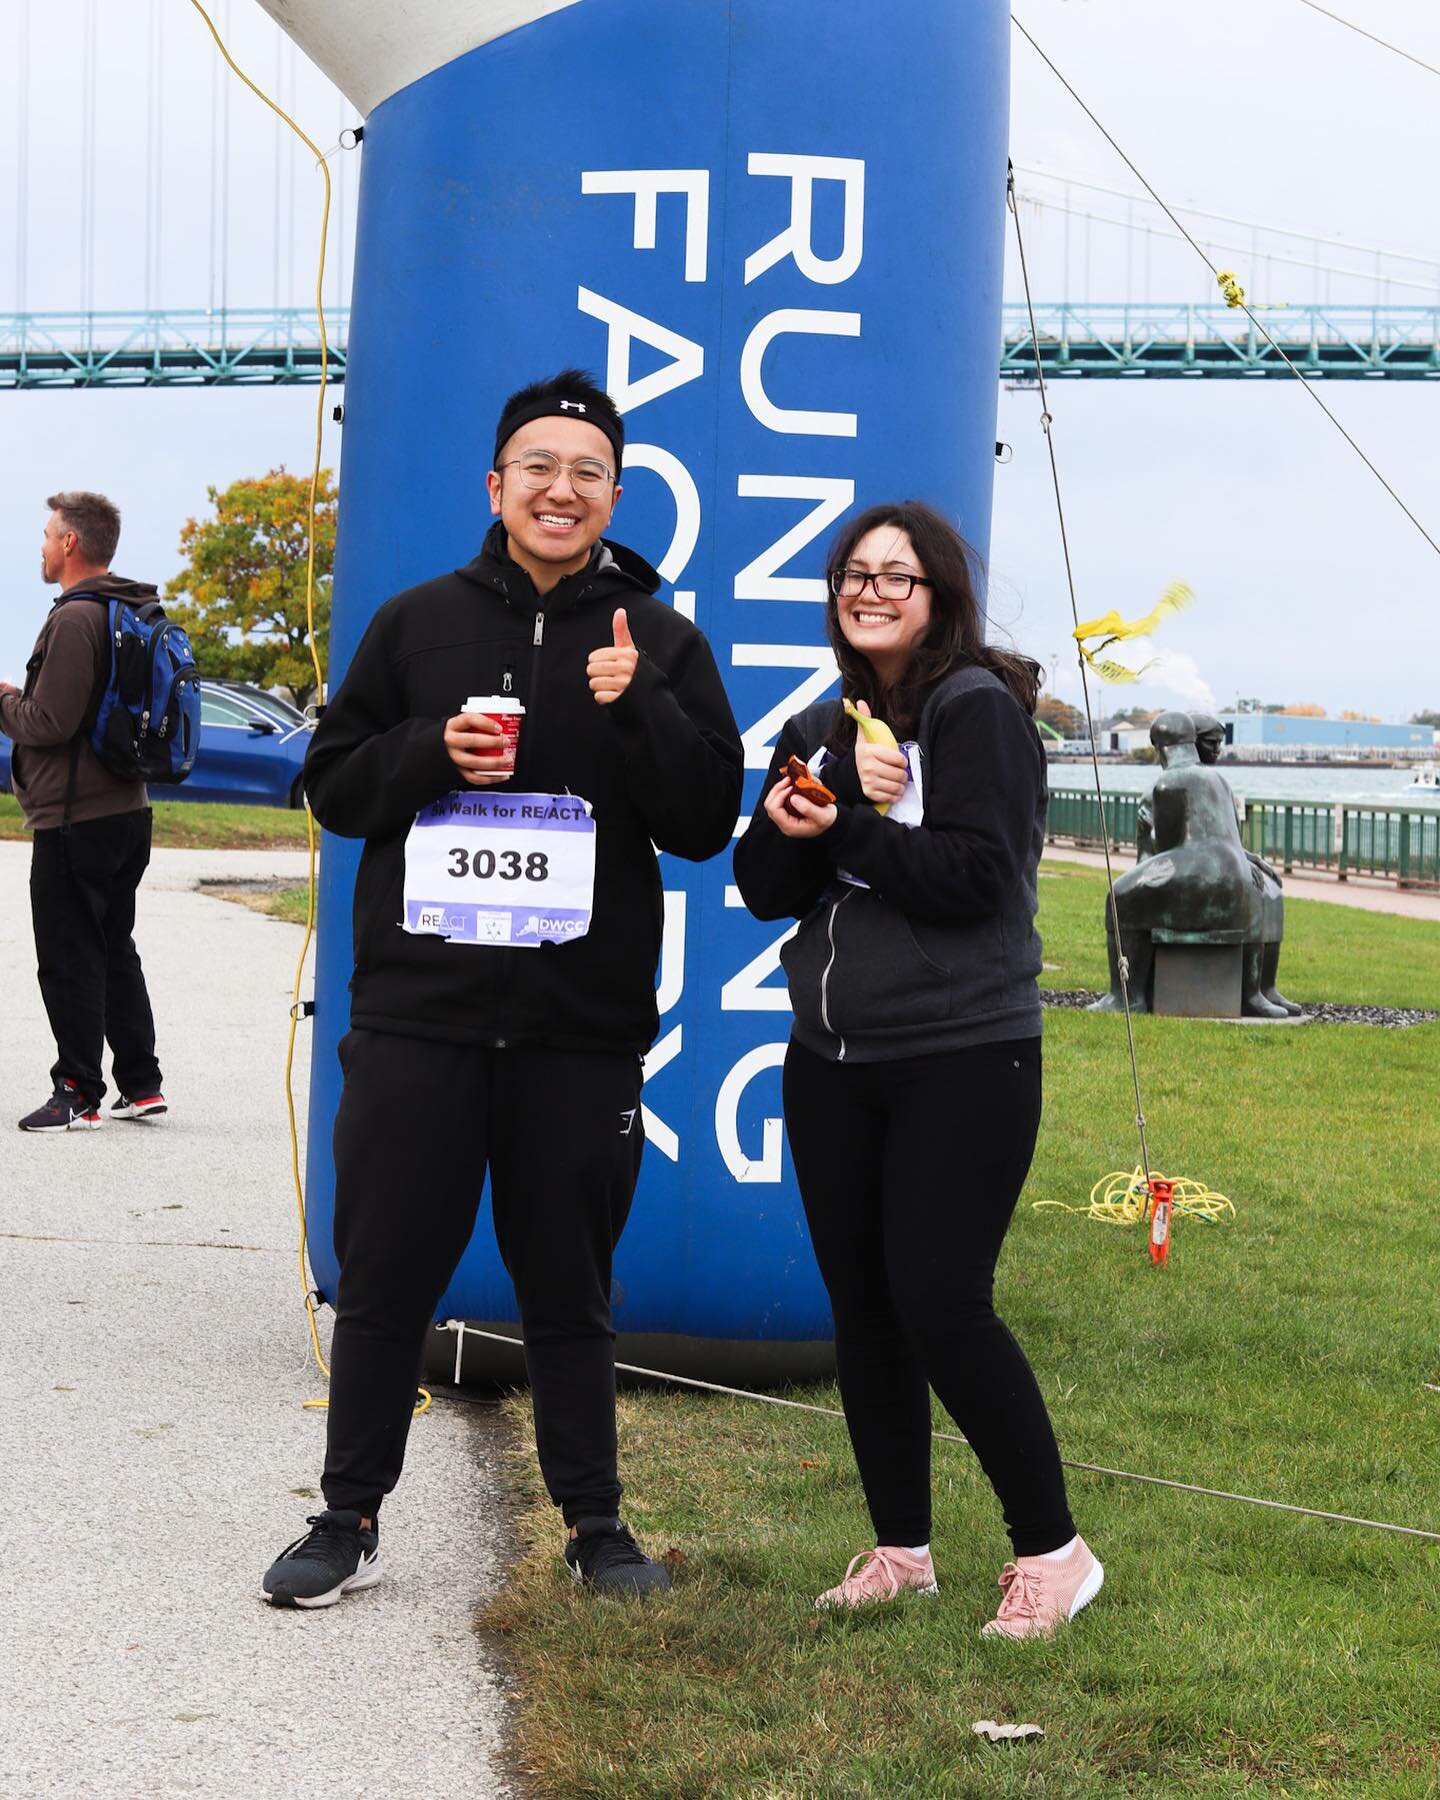 What a great time we had this past weekend at our 5k Walk/Run for RE/ACT! 

This event makes our RE/ACT Program possible, so we can&rsquo;t thank you enough for all of the support we have received, either through participation, donations or your best